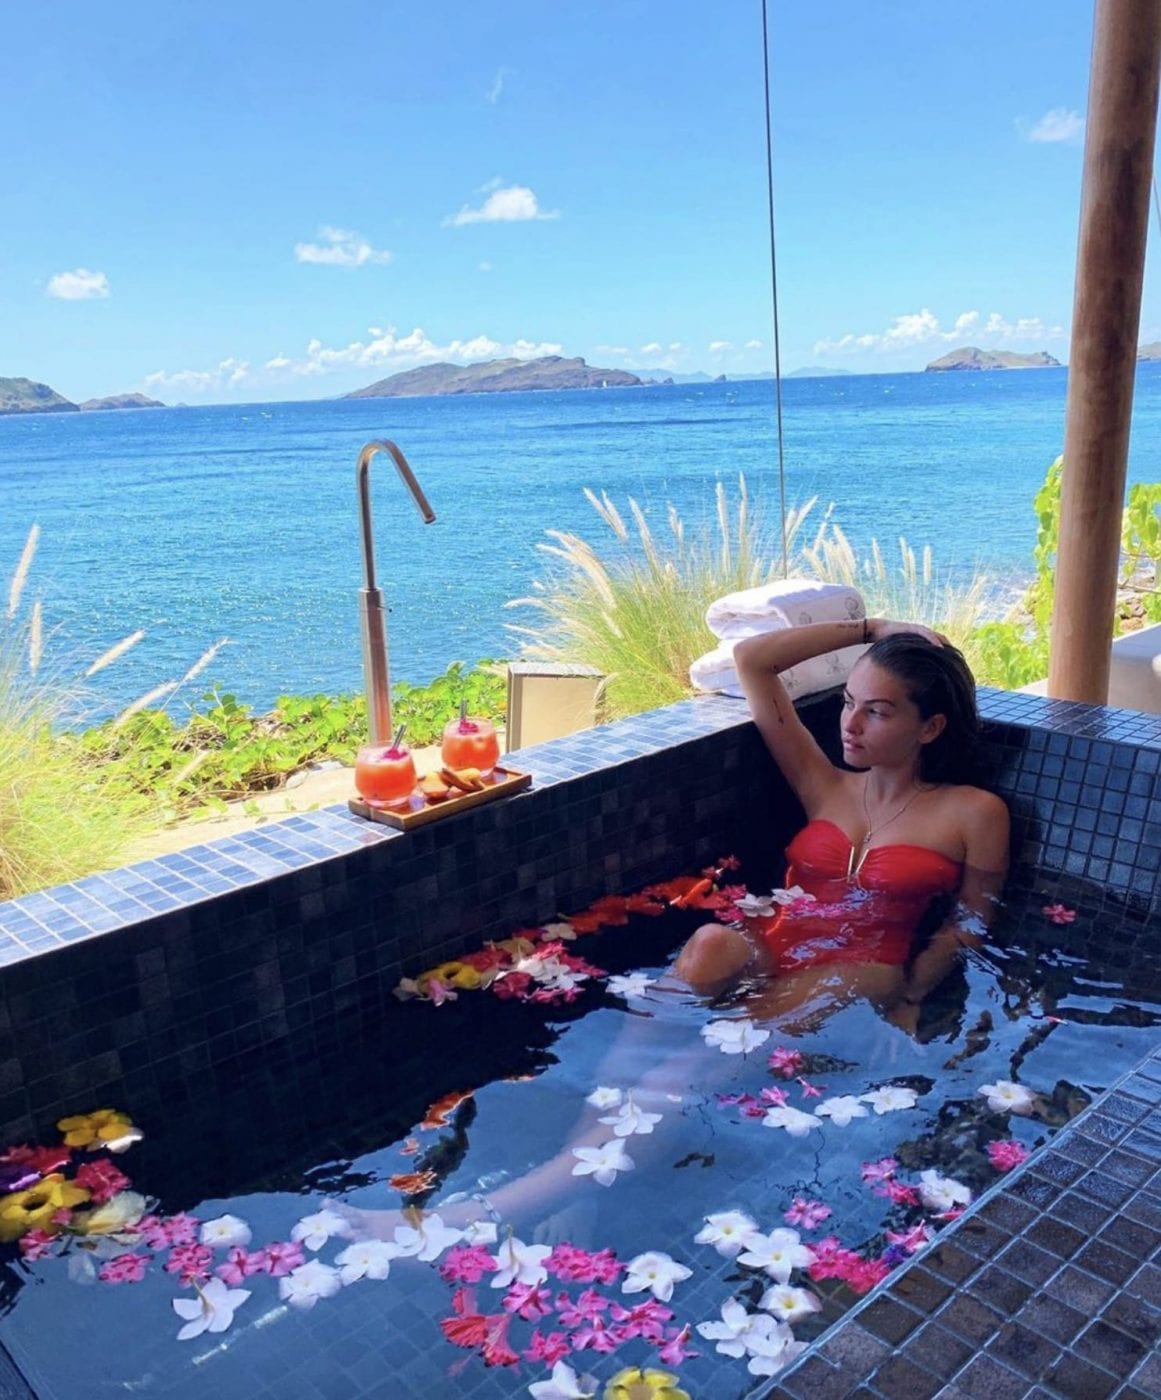 Thylane Blondeau enjoyed a bath with a view. Credit: Instagram